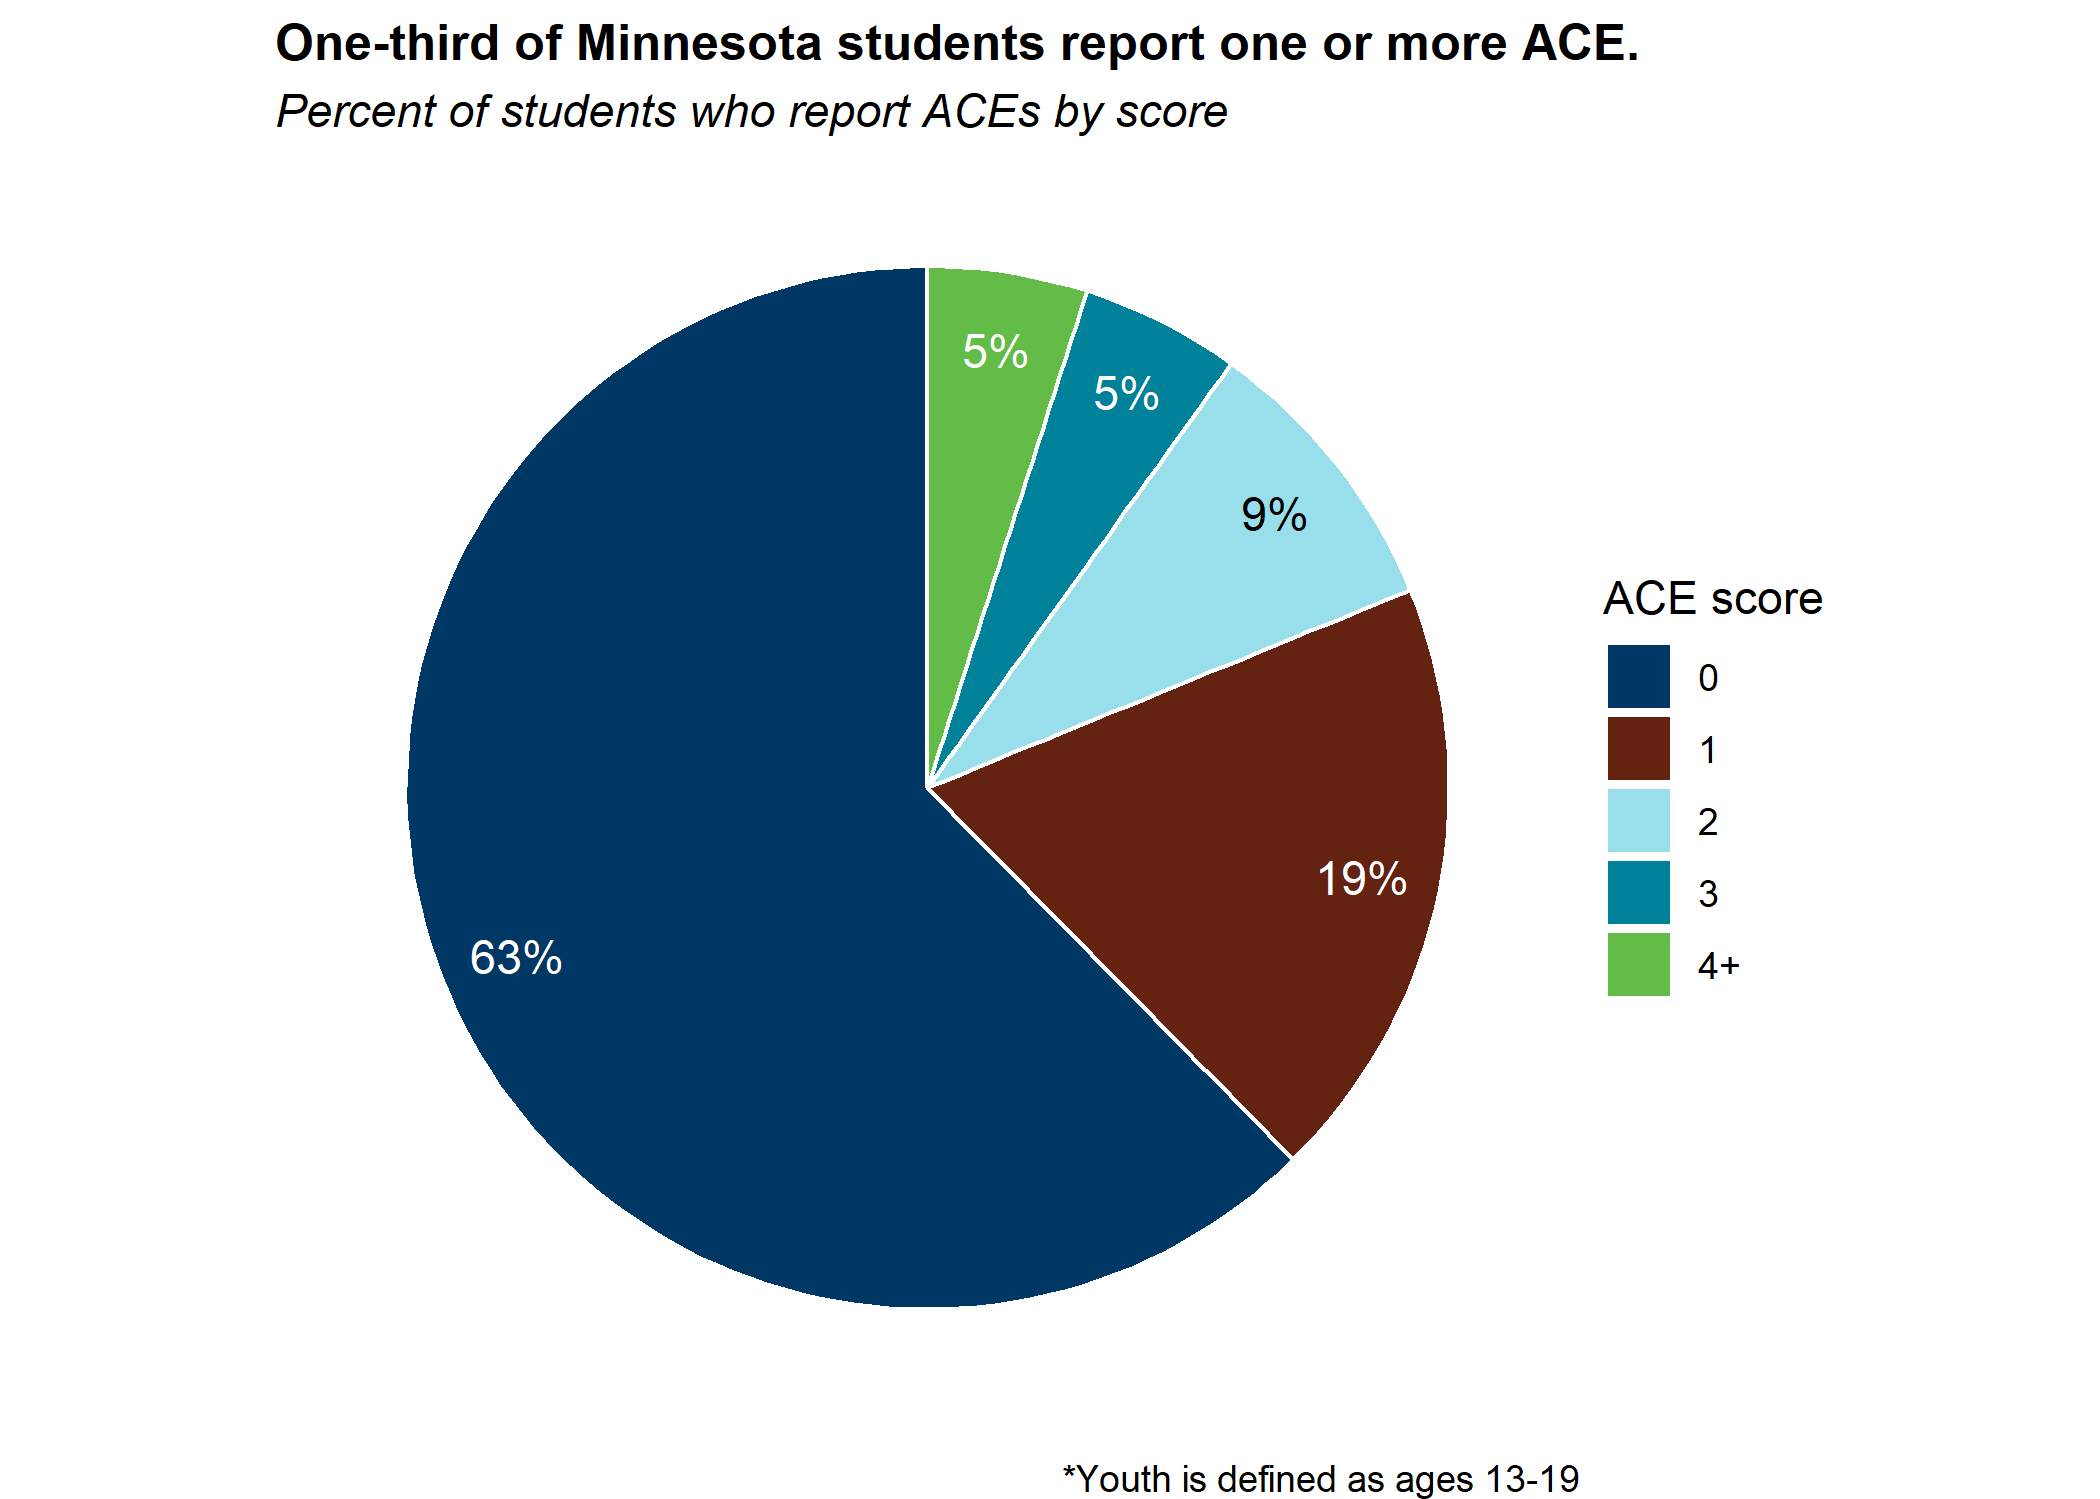 One Third of Minnesota Students report one or more adverse childhood experience.